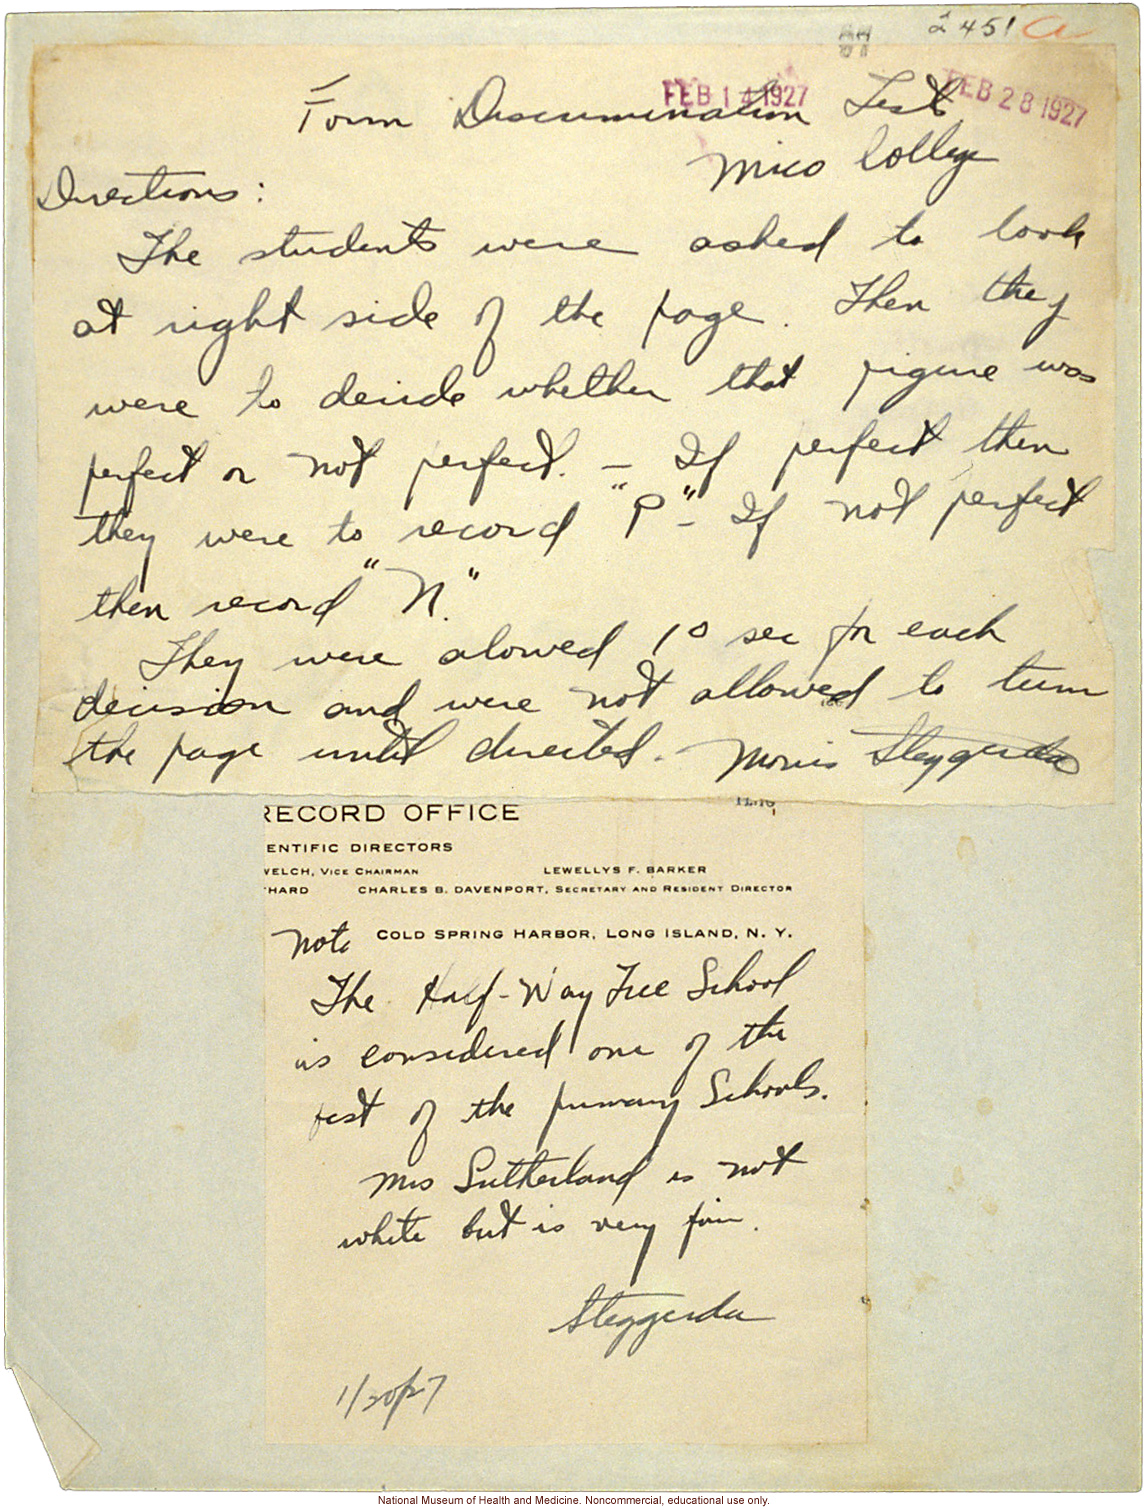 Morris Steggerda's handwritten directions for administering Form Discrimination Tests conducted at Mico College for <i>Race Crossing in Jamaica</i>C